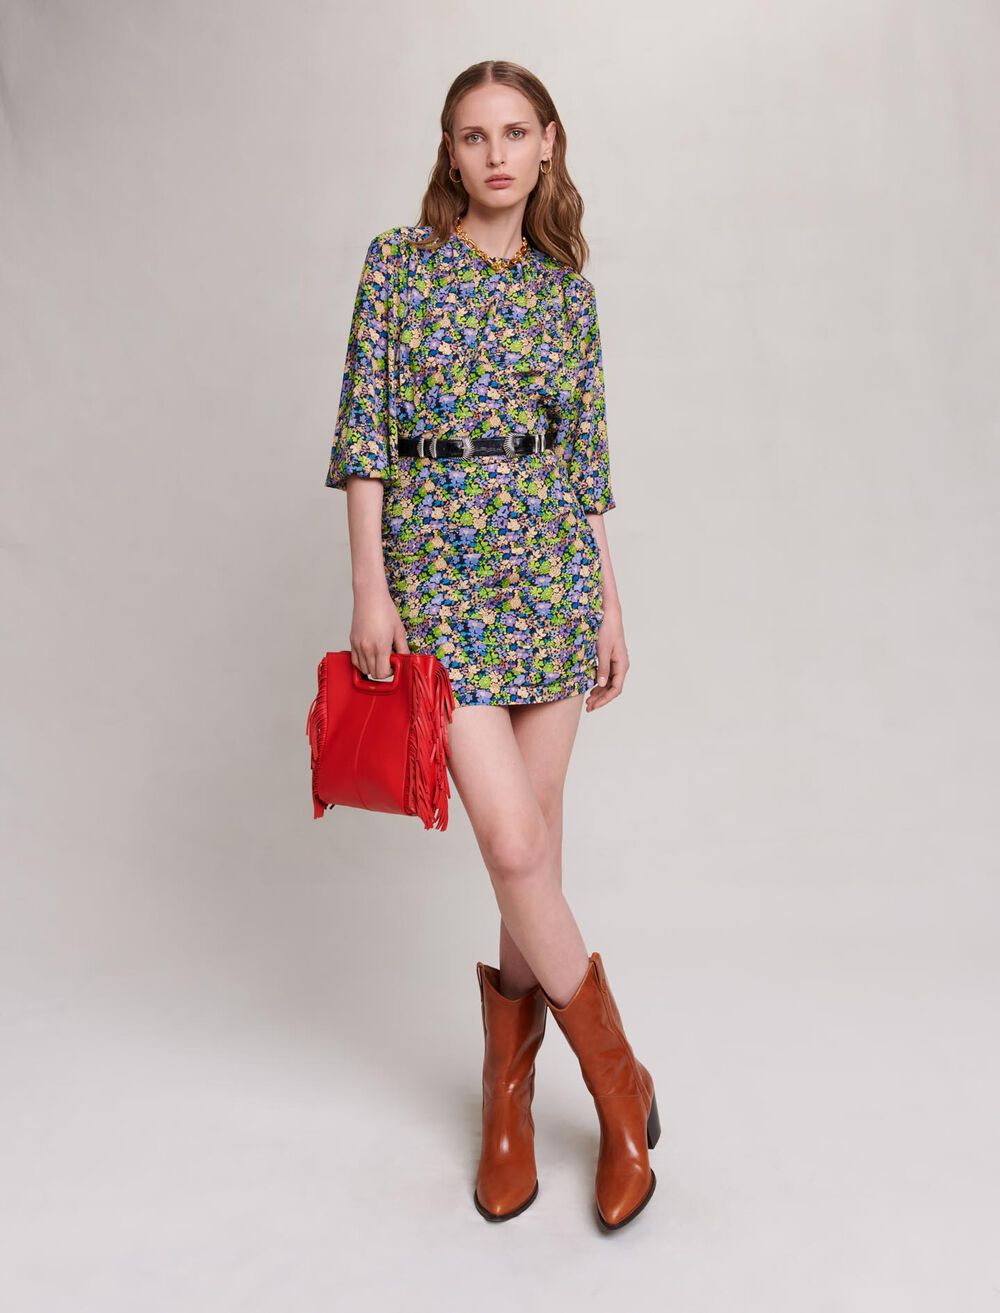 Primroses Multico Print featured Short dress with floral print